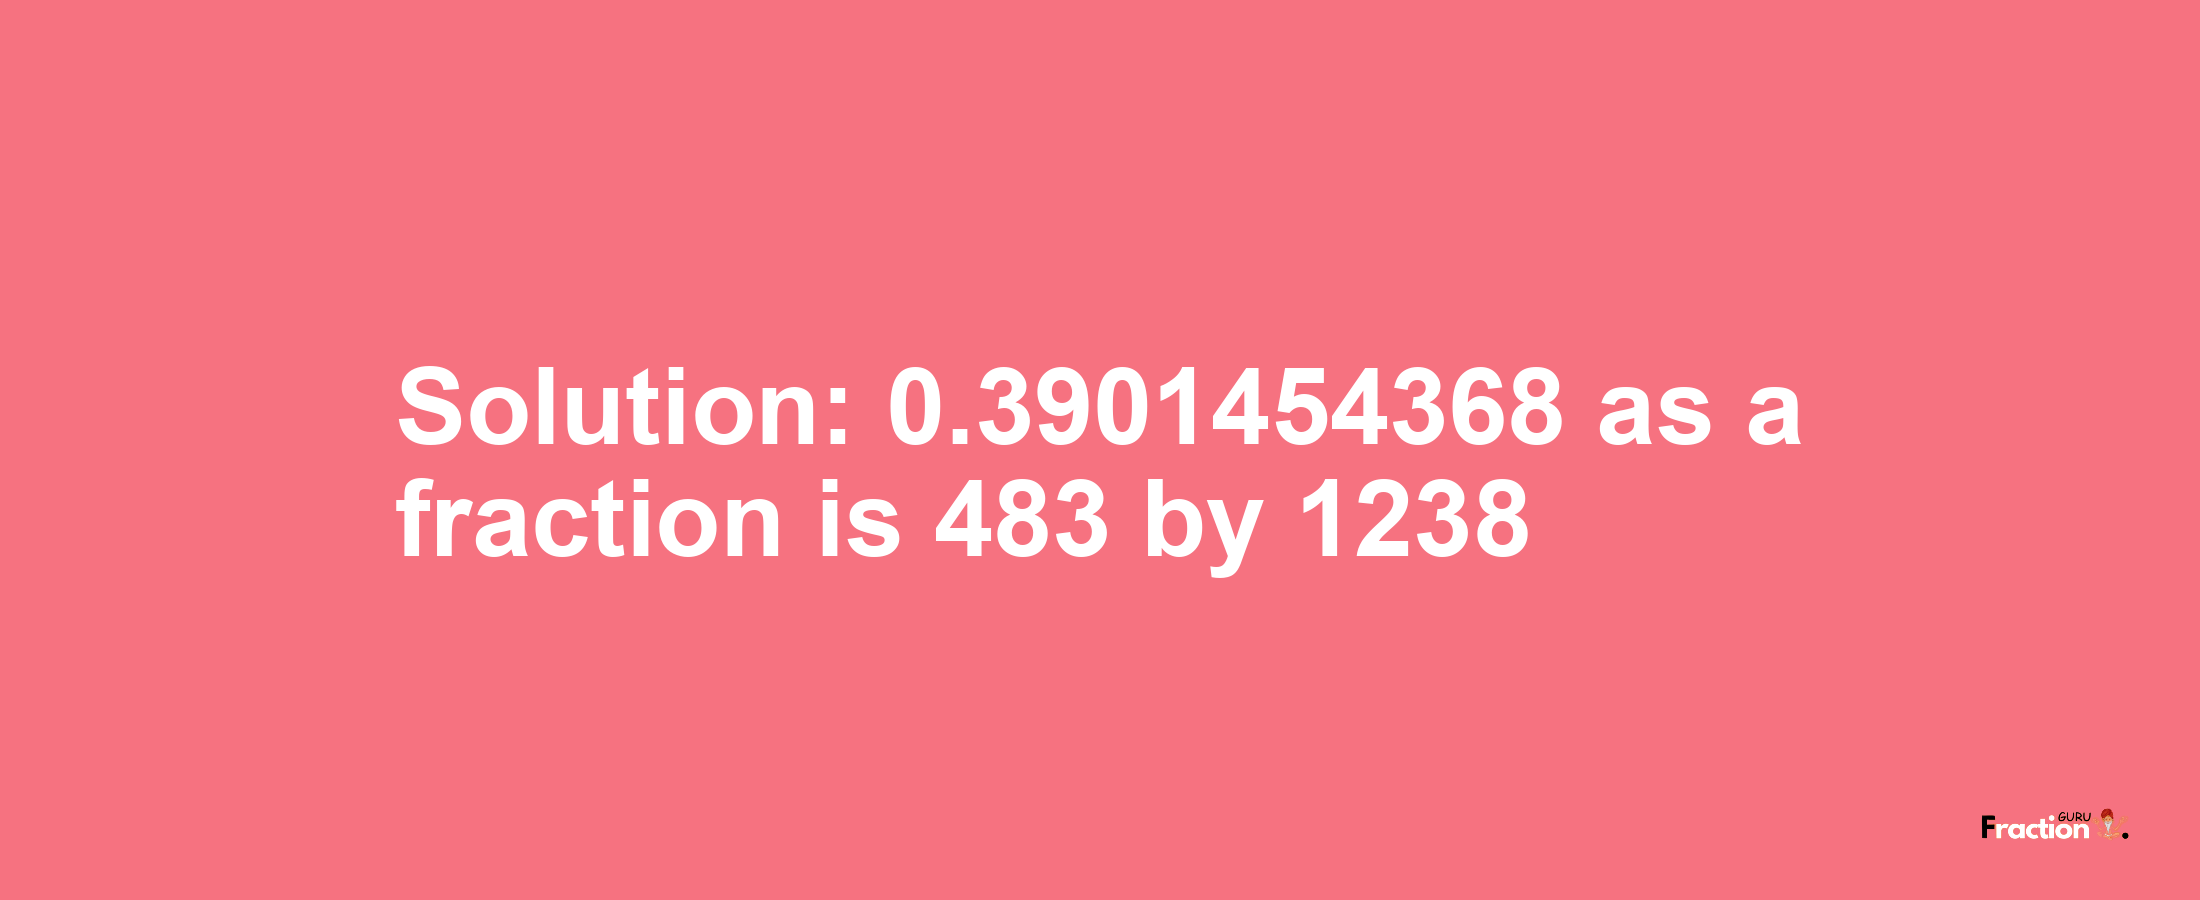 Solution:0.3901454368 as a fraction is 483/1238